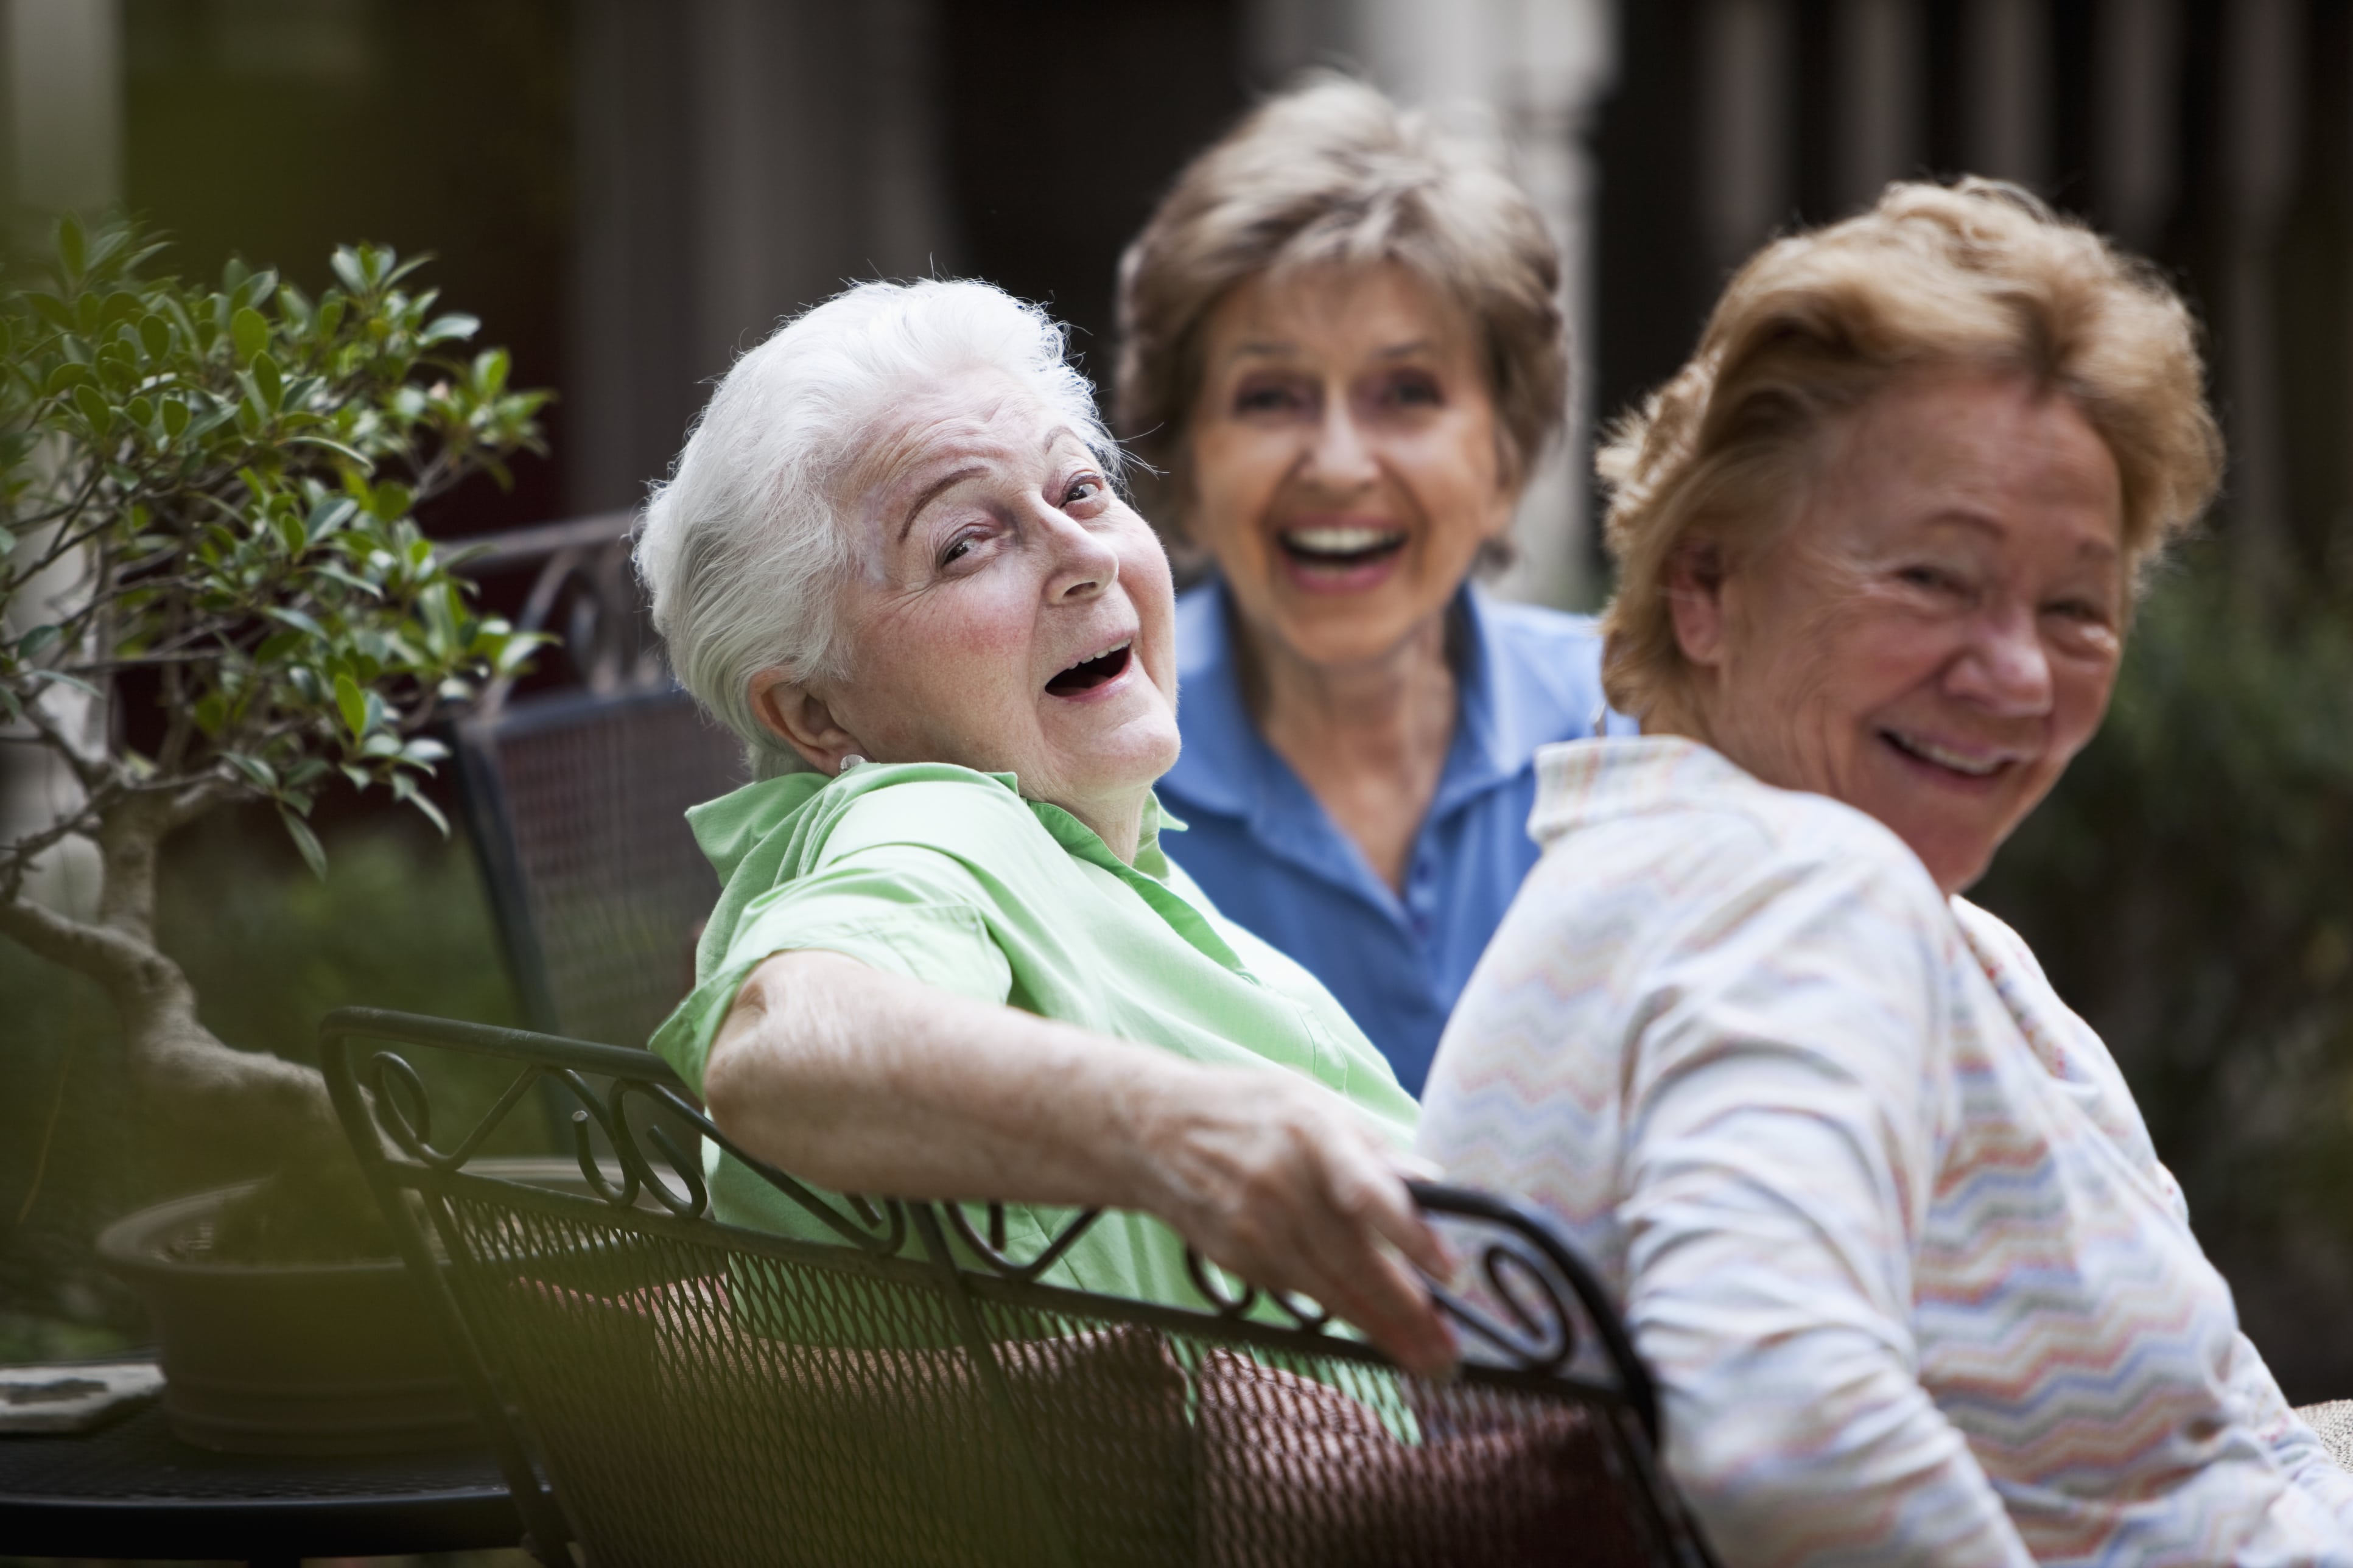 Three older women sitting outdoors, smiling, and enjoying each other.